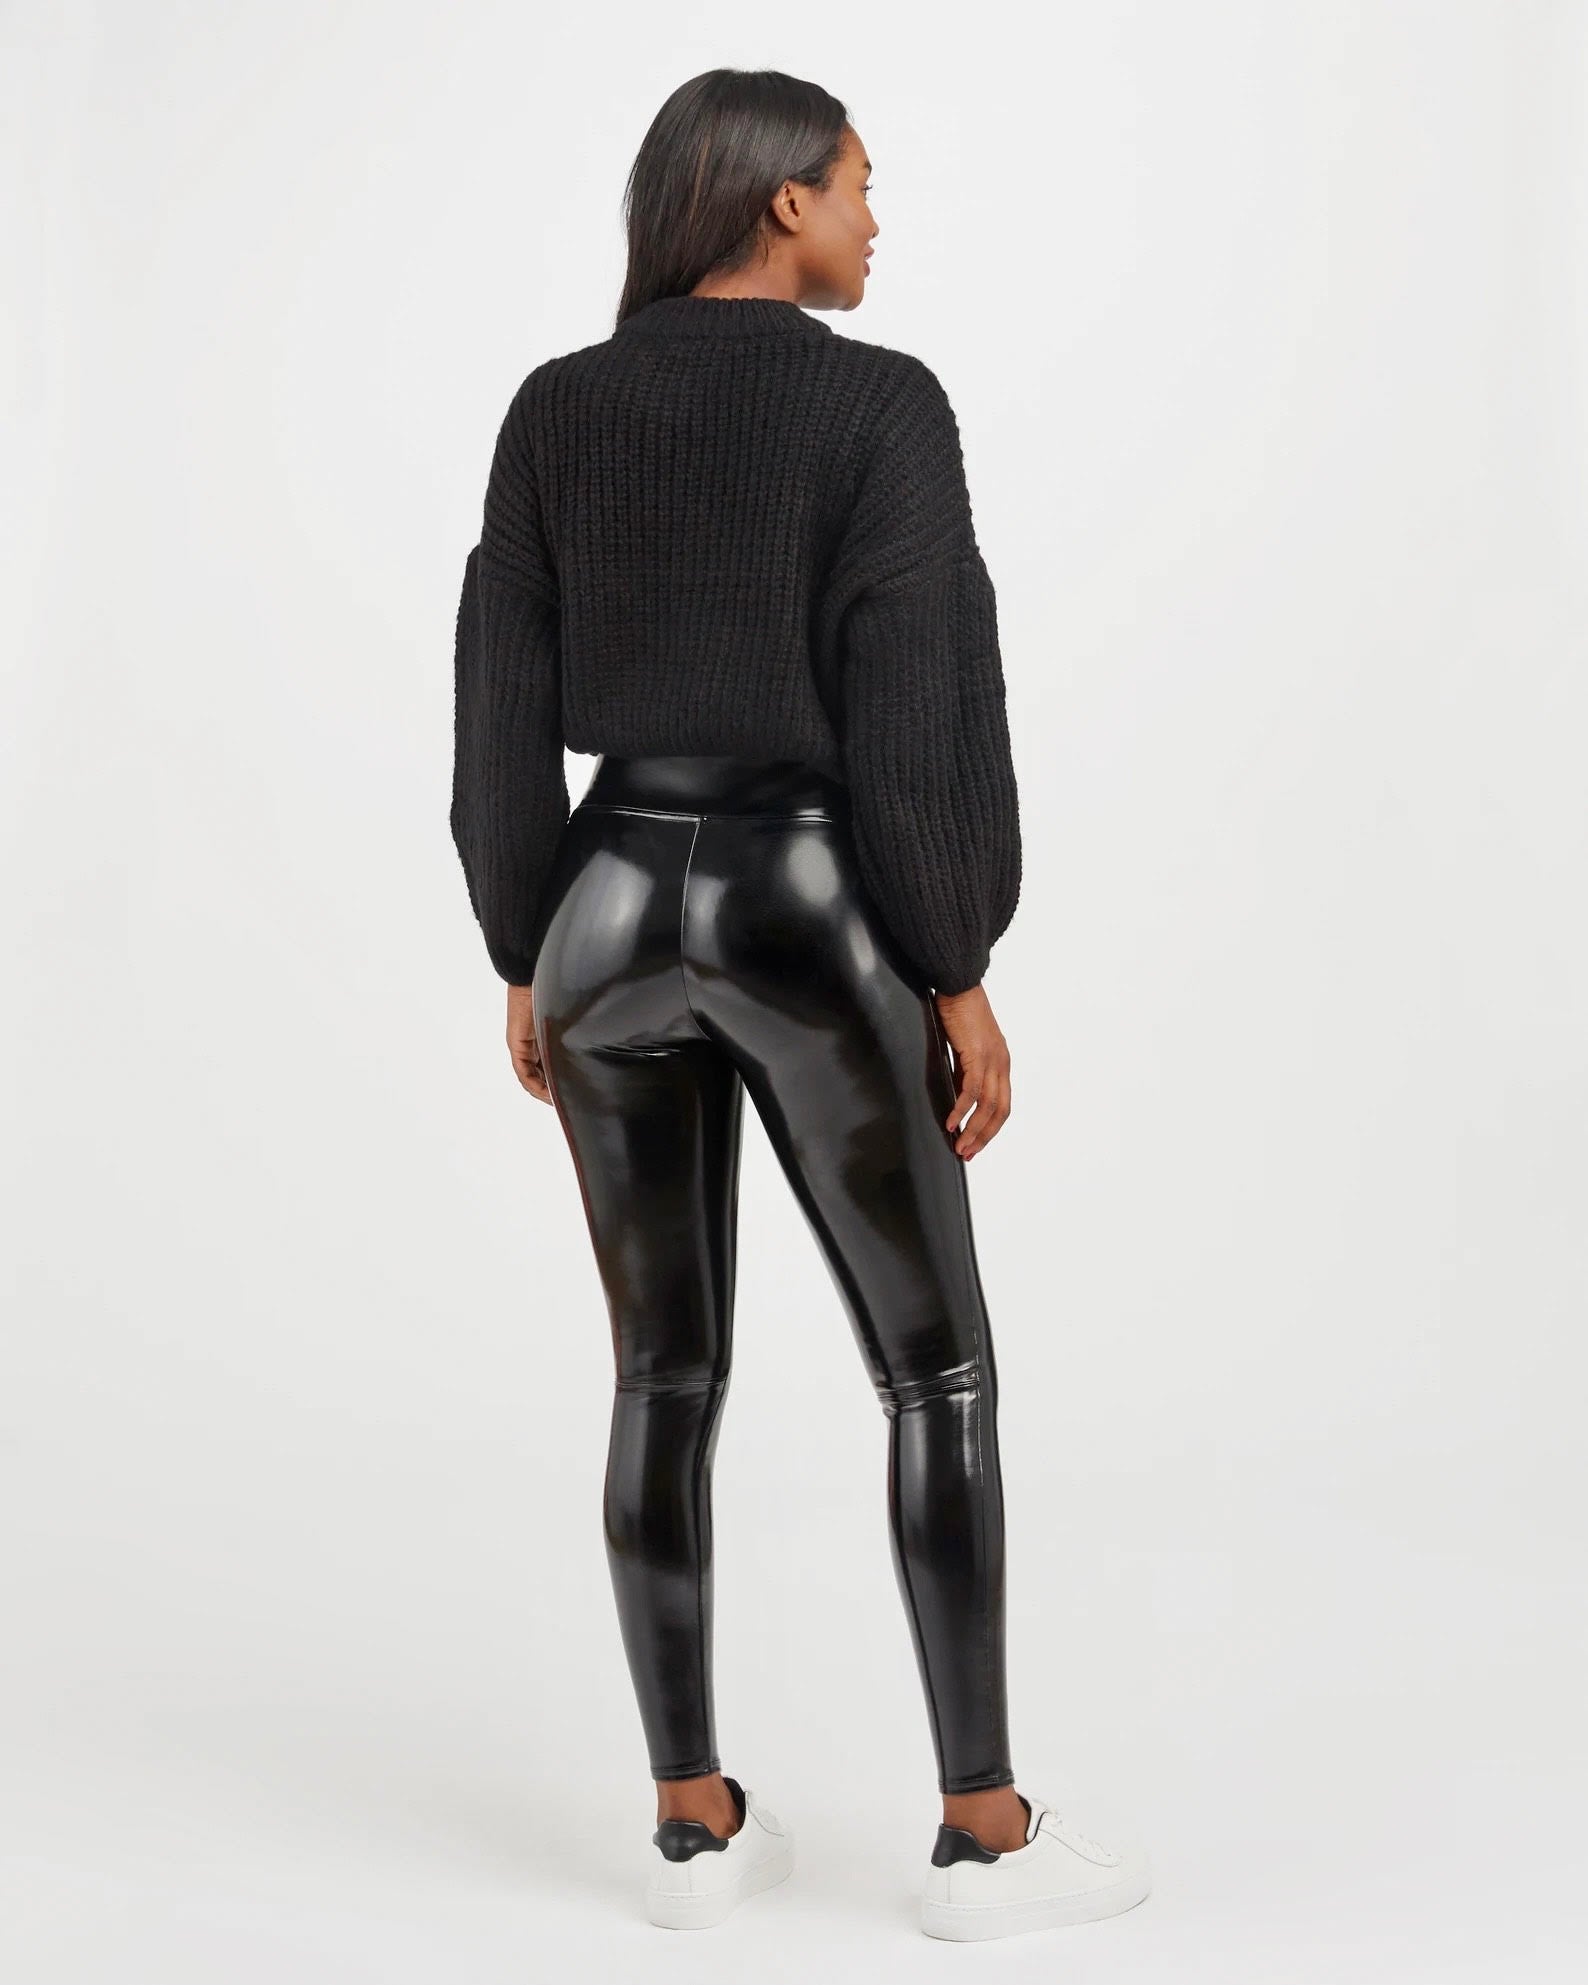 Bestselling $98 Spanx faux leather leggings come in new colours